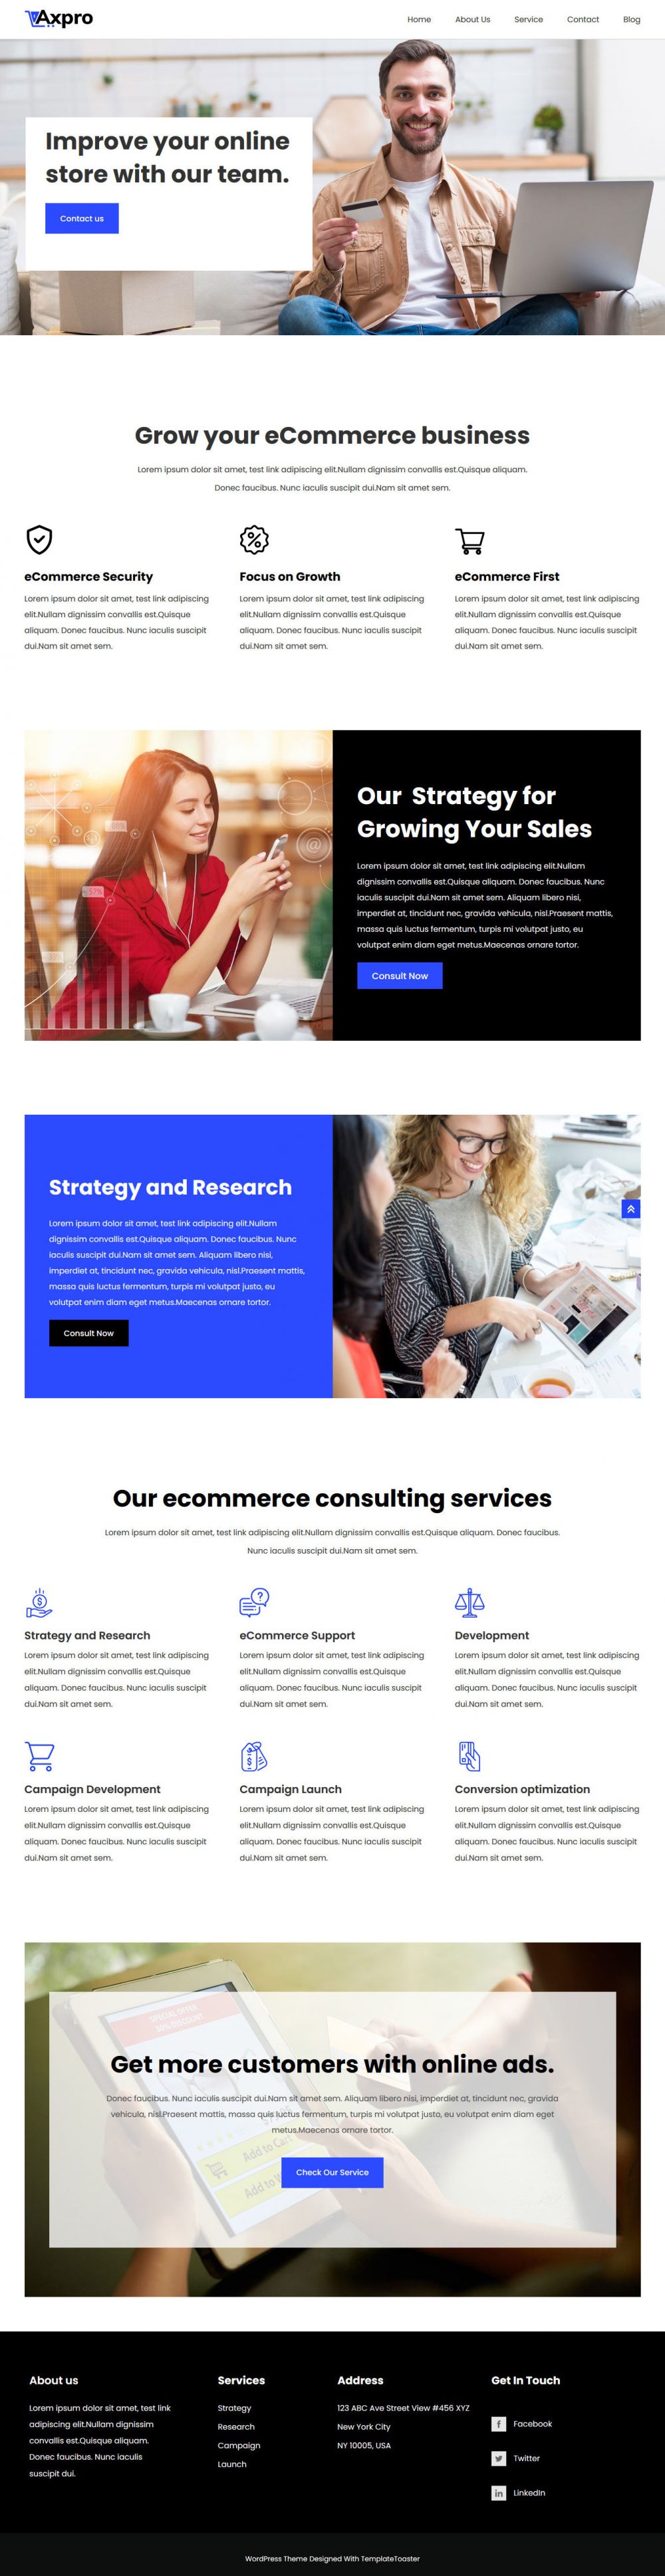 axpro ecommerce business consulting agency joomla template